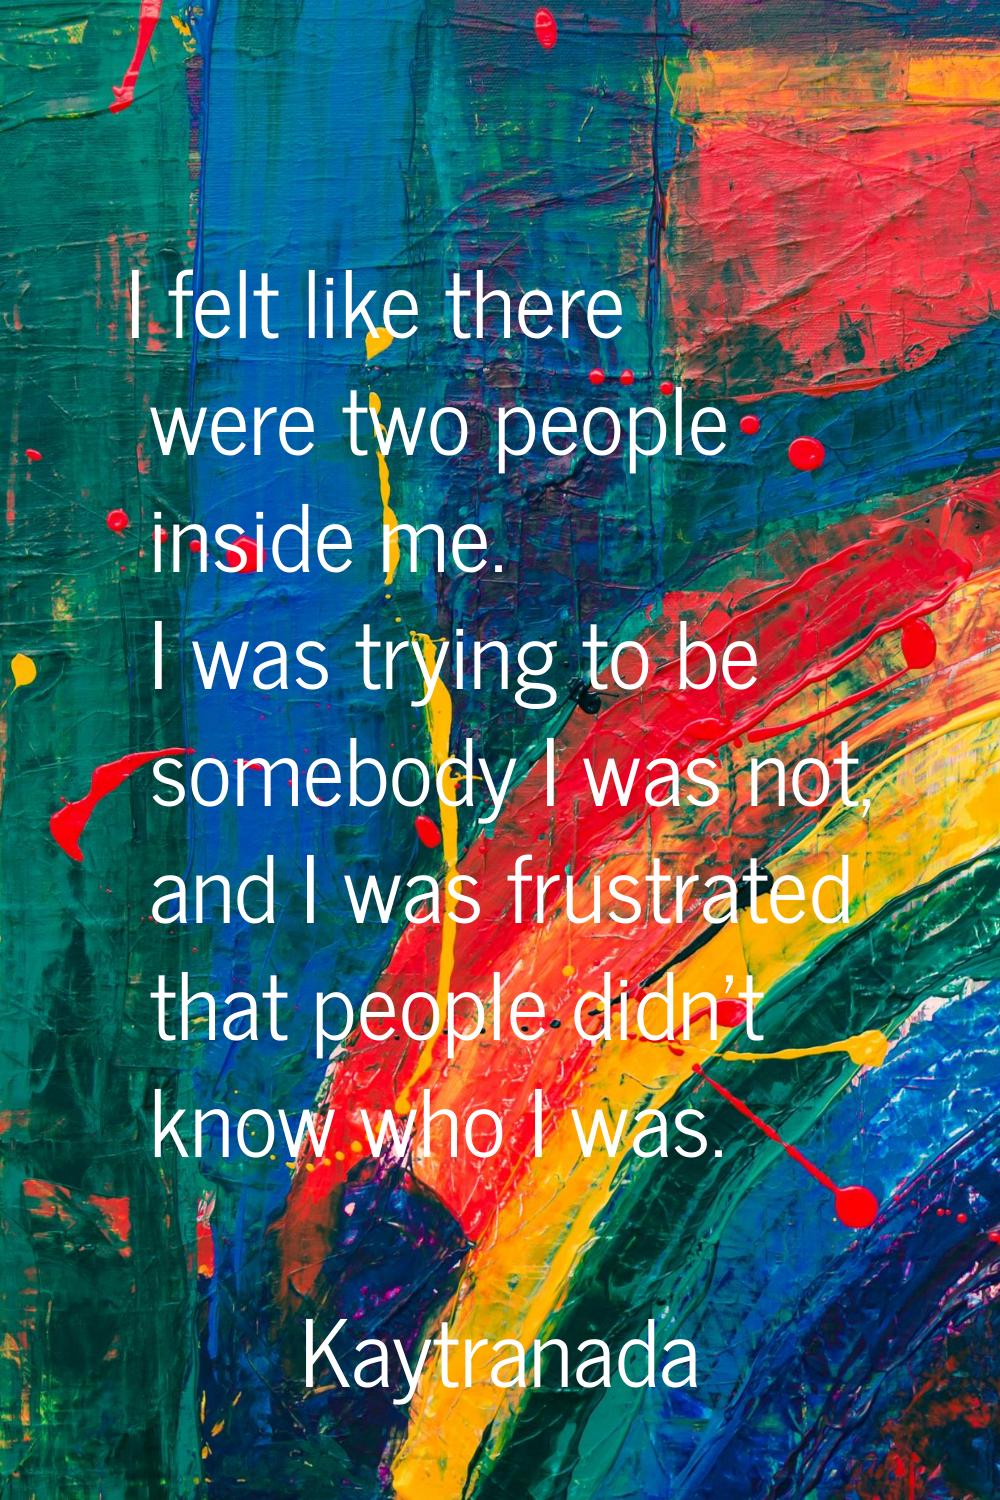 I felt like there were two people inside me. I was trying to be somebody I was not, and I was frust